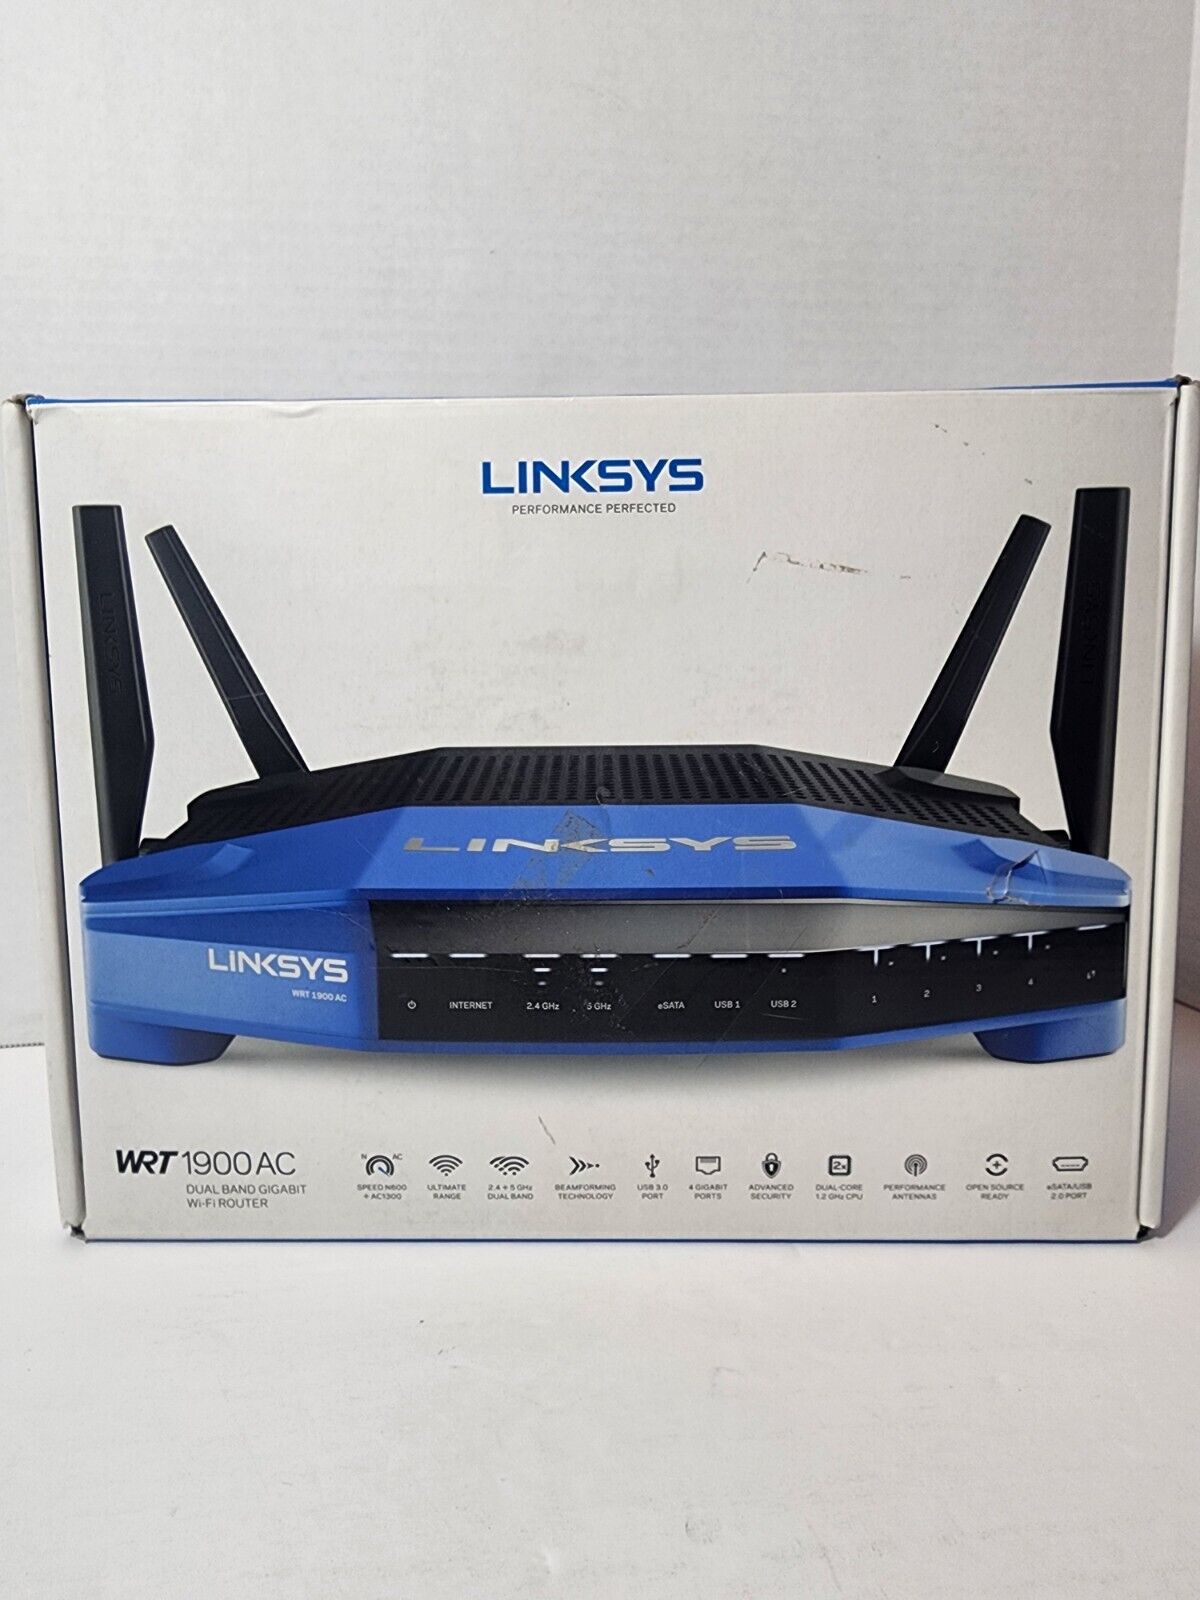 Linksys WRT1900ACS 1300 Mbps 4-Port Dual-Band Wi-Fi Router with 1.6 GHz CPU